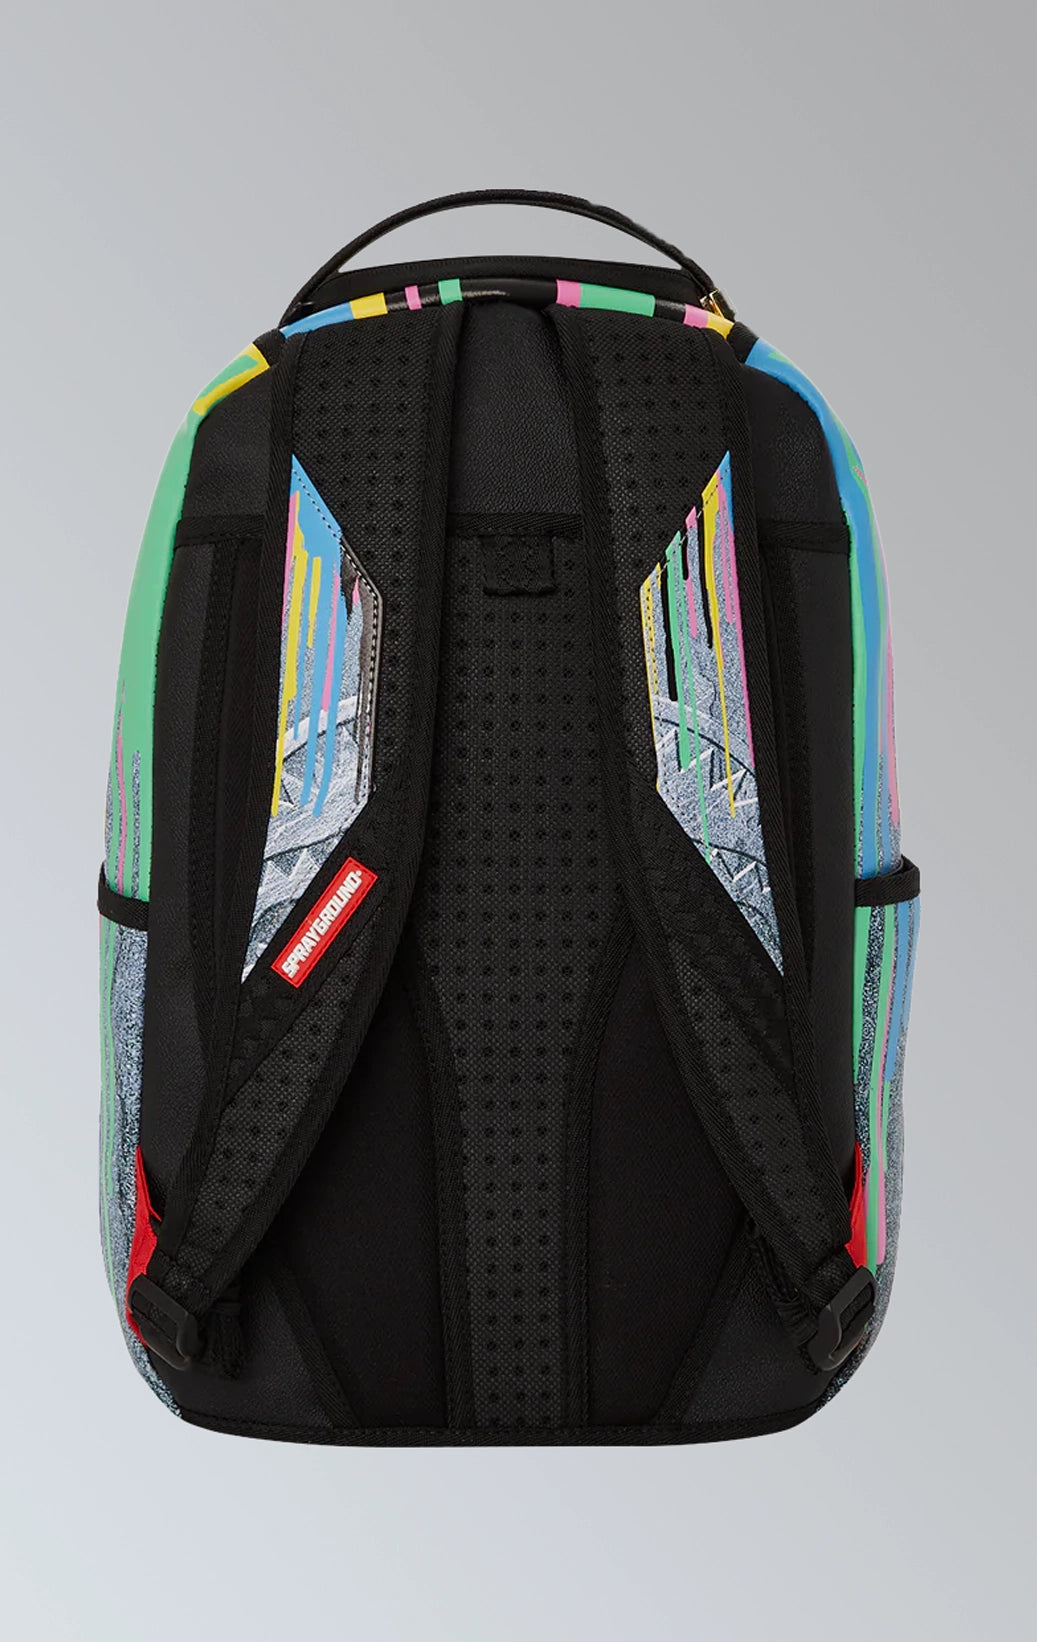 Drippy Stone Shark limited edition backpack from Sprayground that features a unique stone shark design with dripping details.